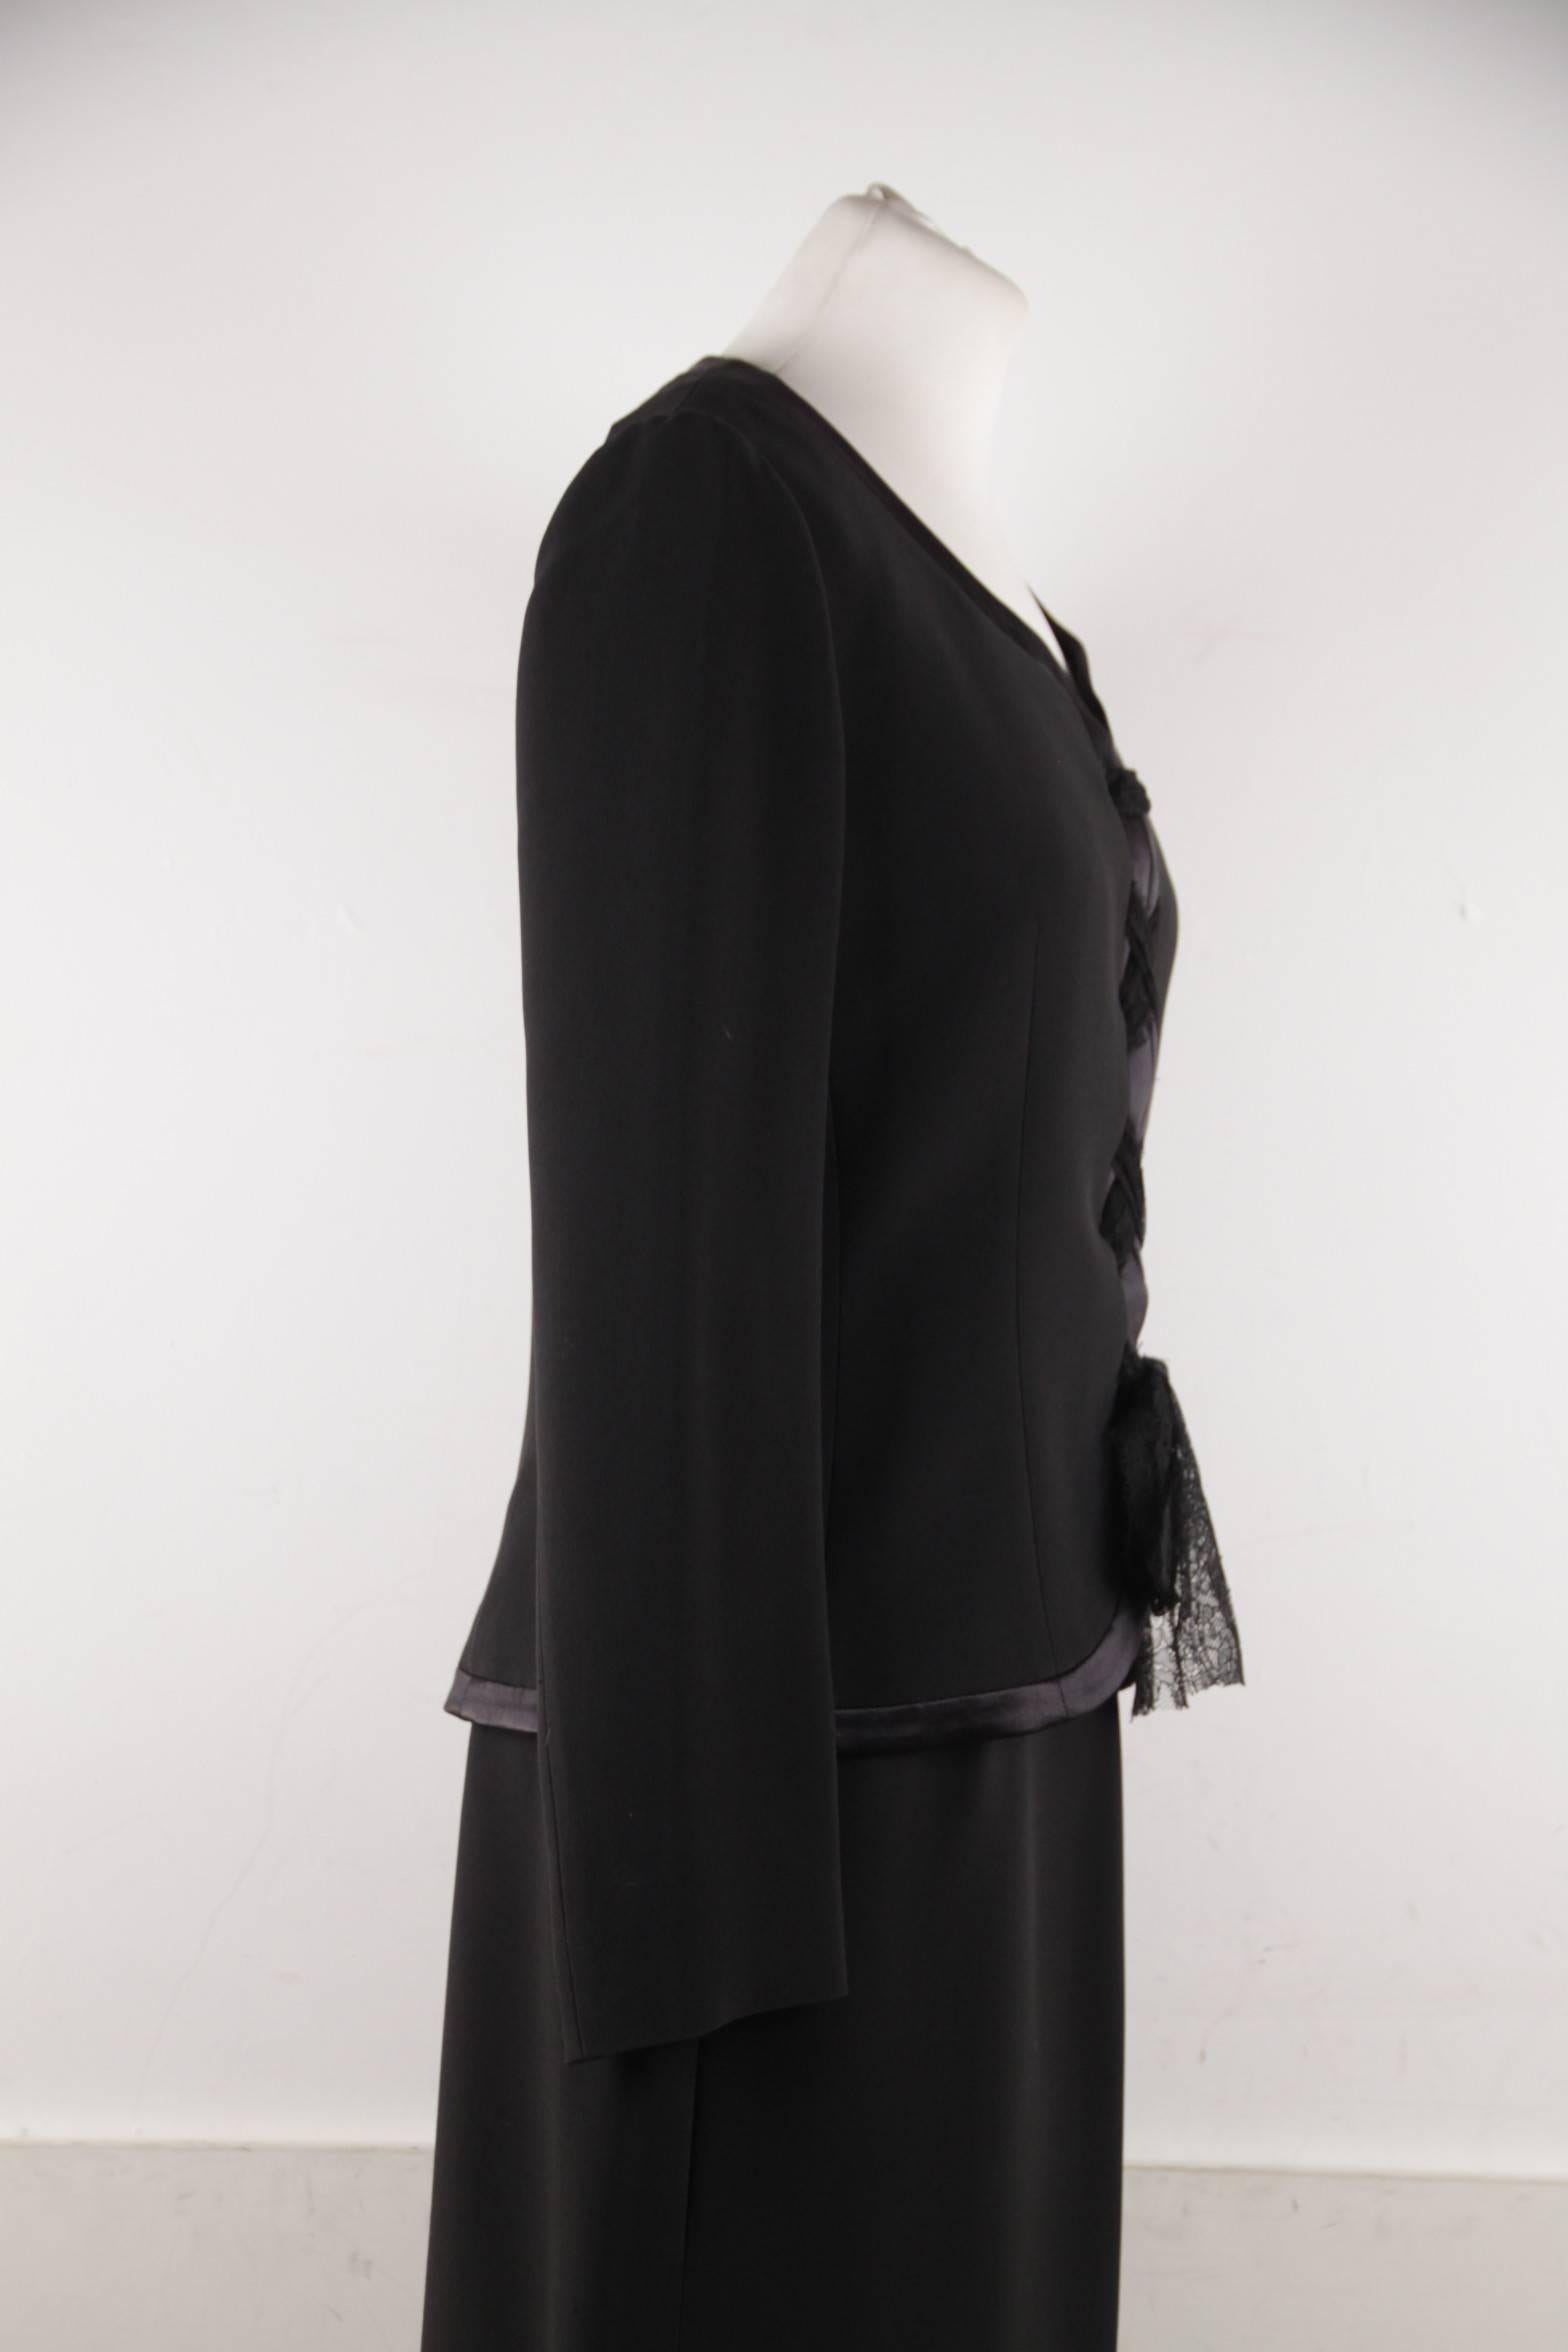 Women's Giorgio Grati Vintage Black Viscose Suit Jacket and Skirt with Laces 